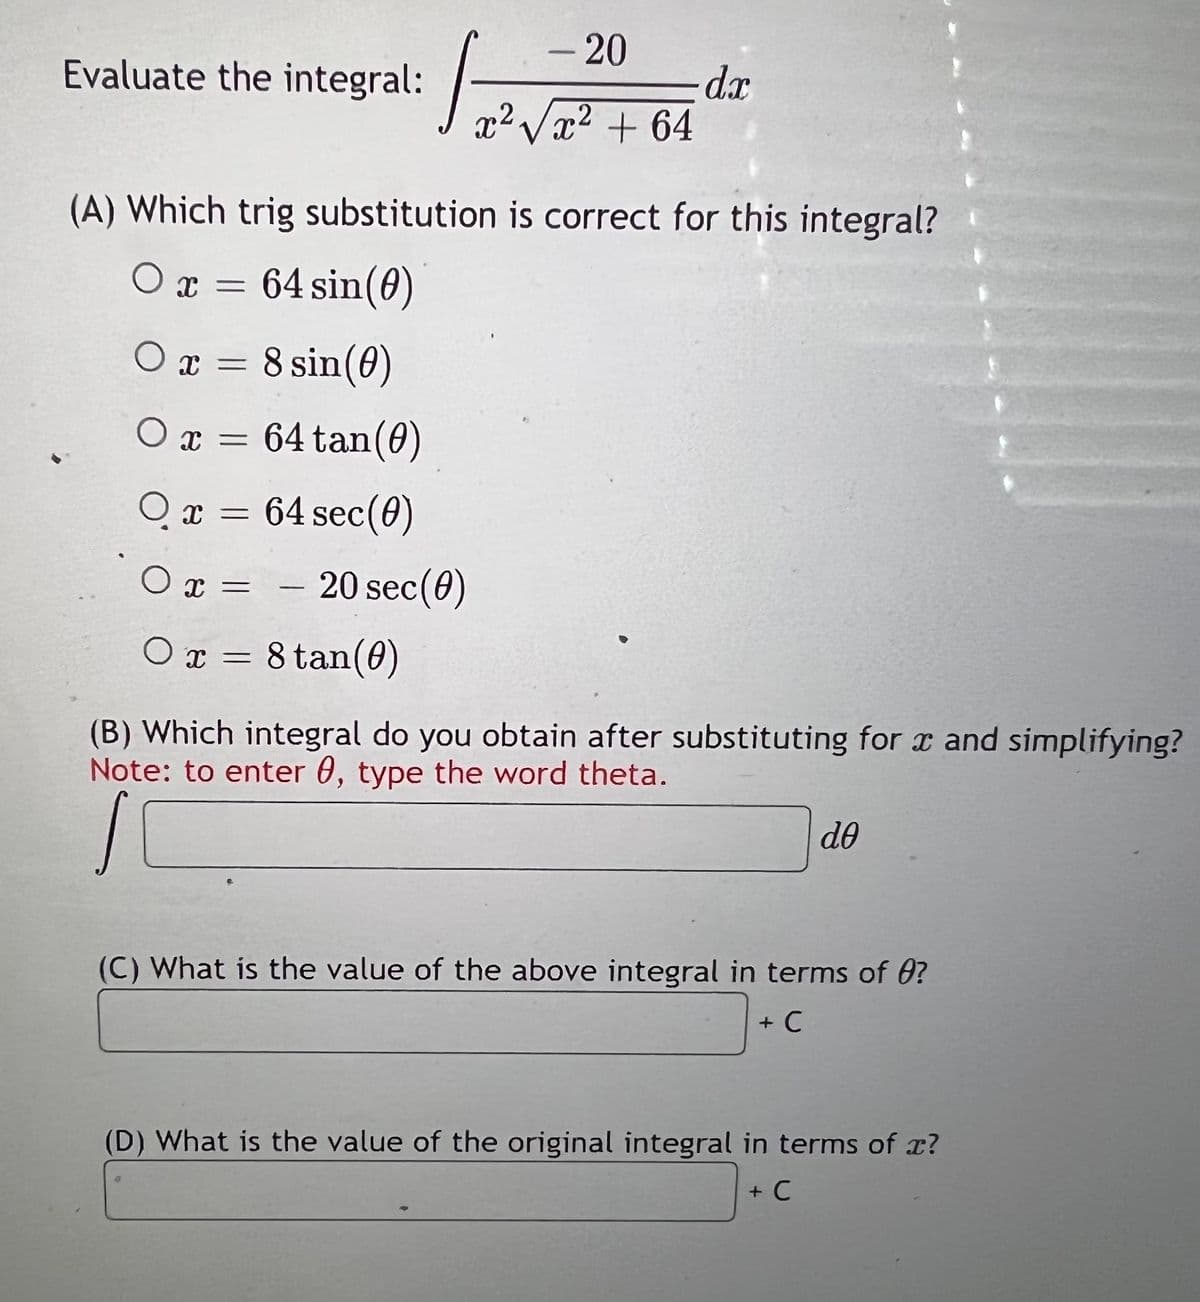 -20
Evaluate the integral:
d.r
x² Vx2 + 64
(A) Which trig substitution is correct for this integral?
O x = 64 sin(0)
O x = 8 sin(0)
O x = 64 tan(0)
O x = 64 sec(0)
O x =
- 20 sec(0)
O x = 8 tan(0)
(B) Which integral do you obtain after substituting for x and simplifying?
Note: to enter 0, type the word theta.
de
(C) What is the value of the above integral in terms of 0?
+ C
(D) What is the value of the original integral in terms of x?
+ C
